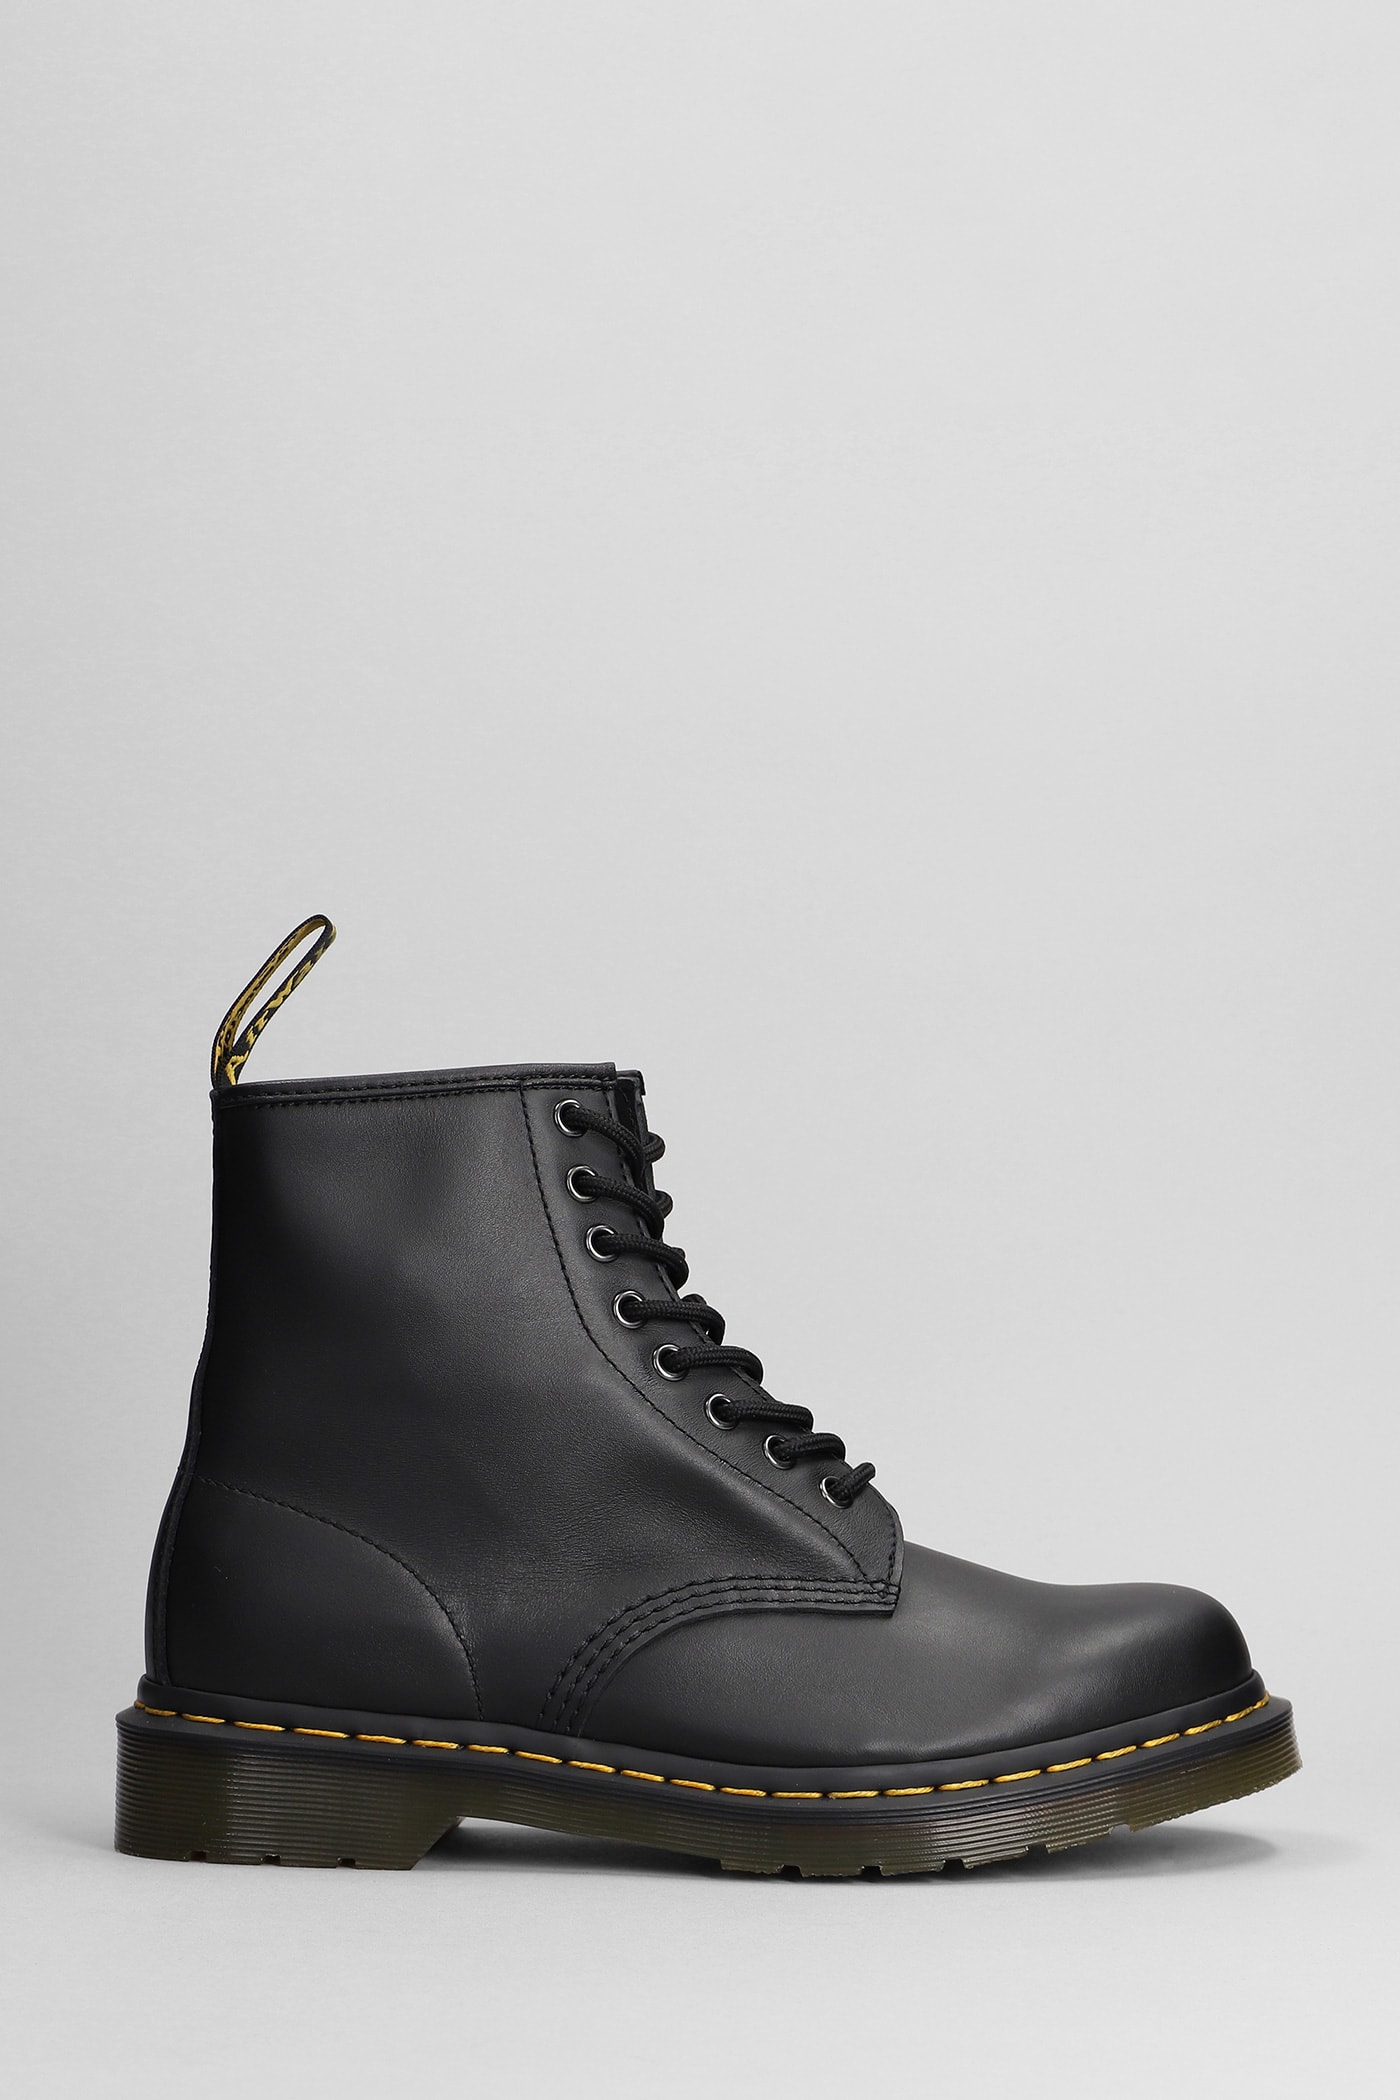 DR. MARTENS' 1460 COMBAT BOOTS IN BLACK LEATHER